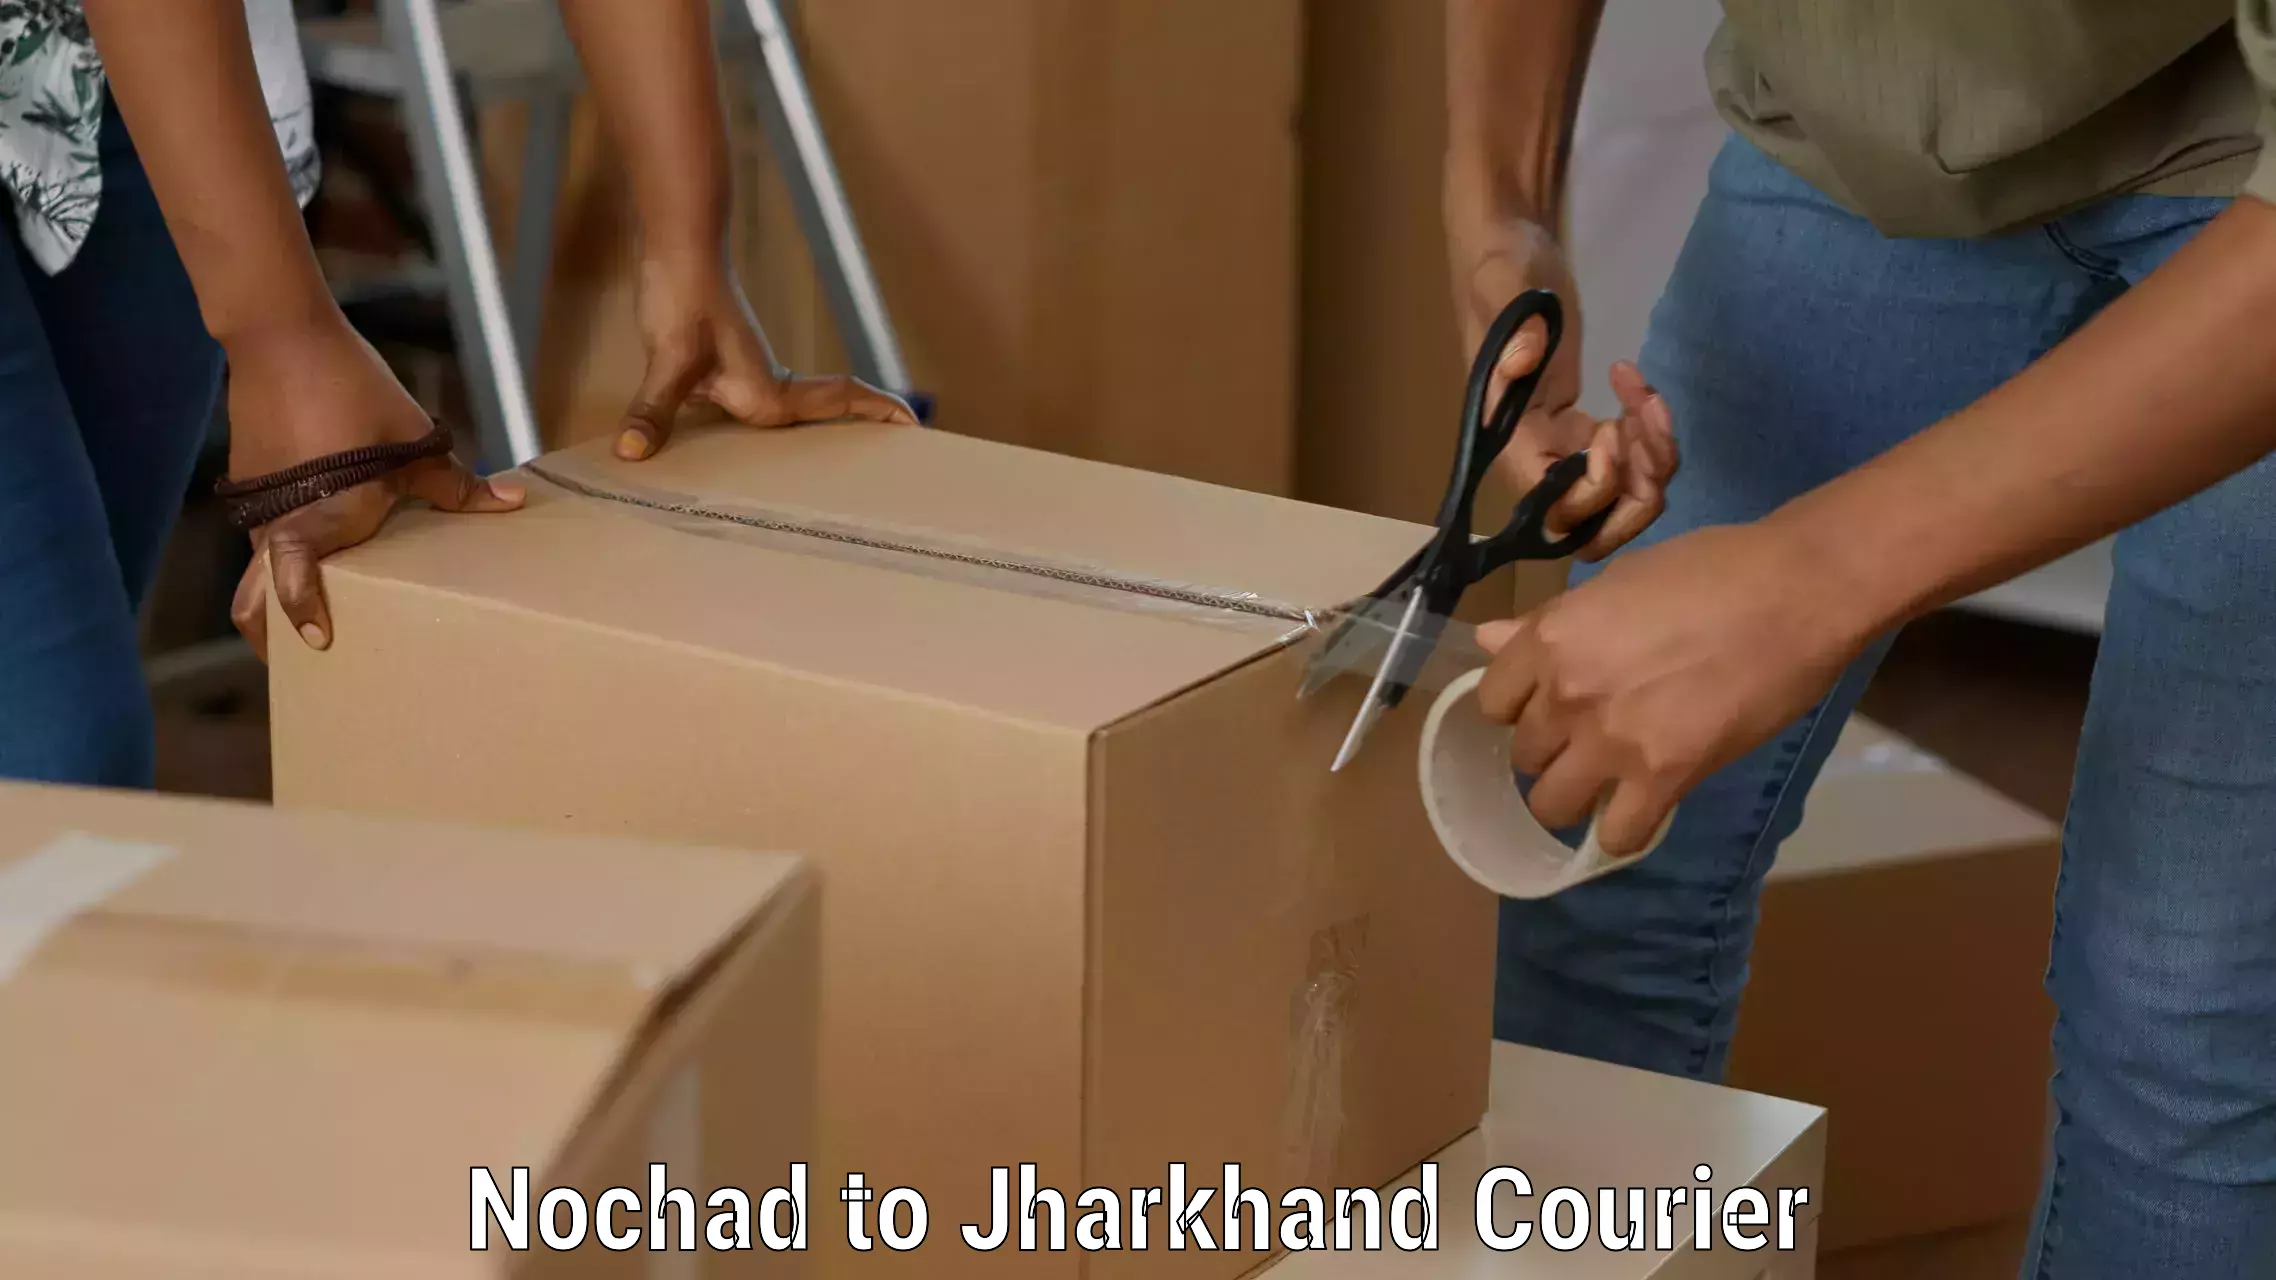 Courier service partnerships Nochad to Jharkhand